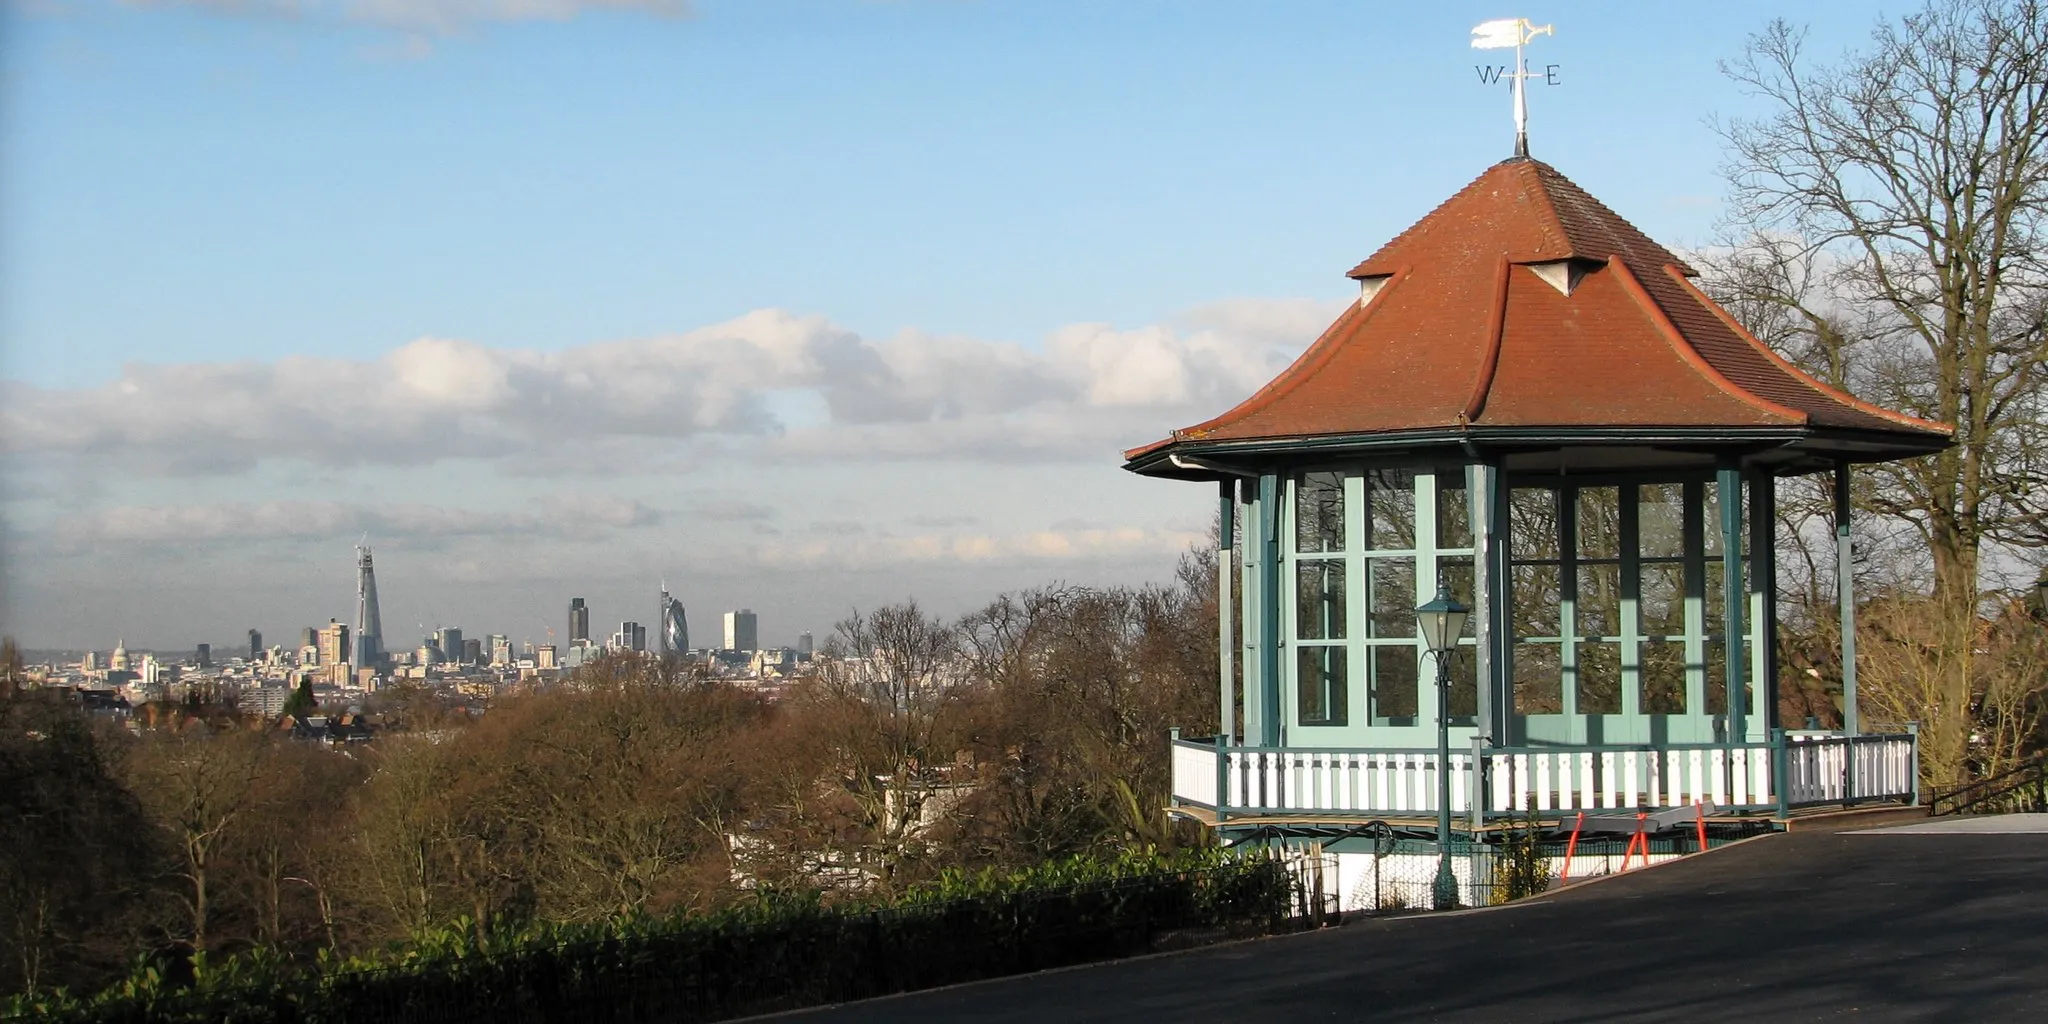 Photo showing: The Horniman Museum bandstand overlooking the London skyline.